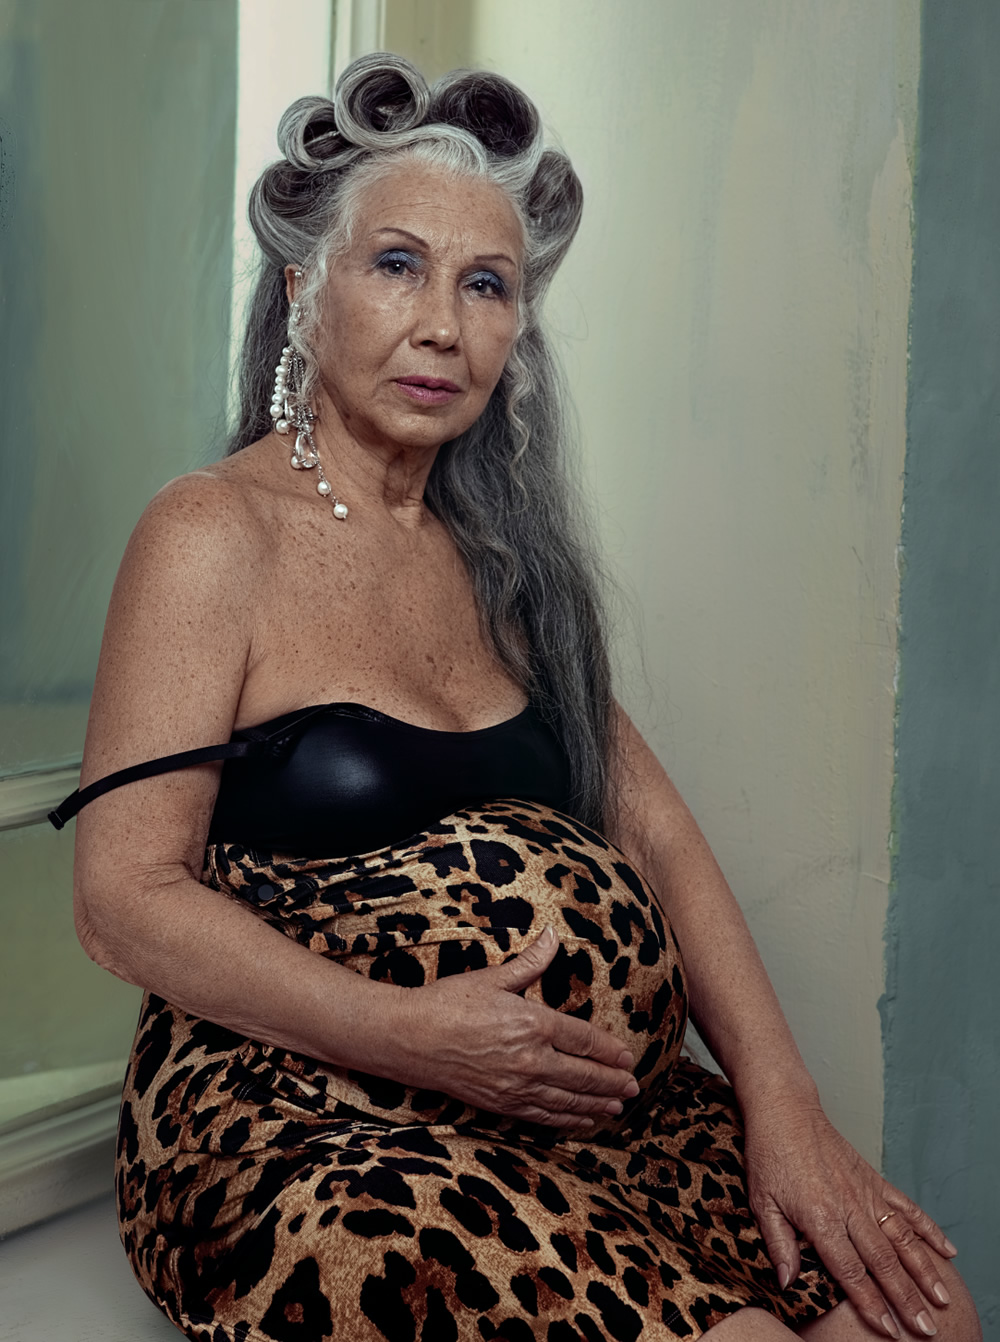 GRANDmothers: Society’s Pressure On Women To Become Mothers A Project By Anna Radchenko